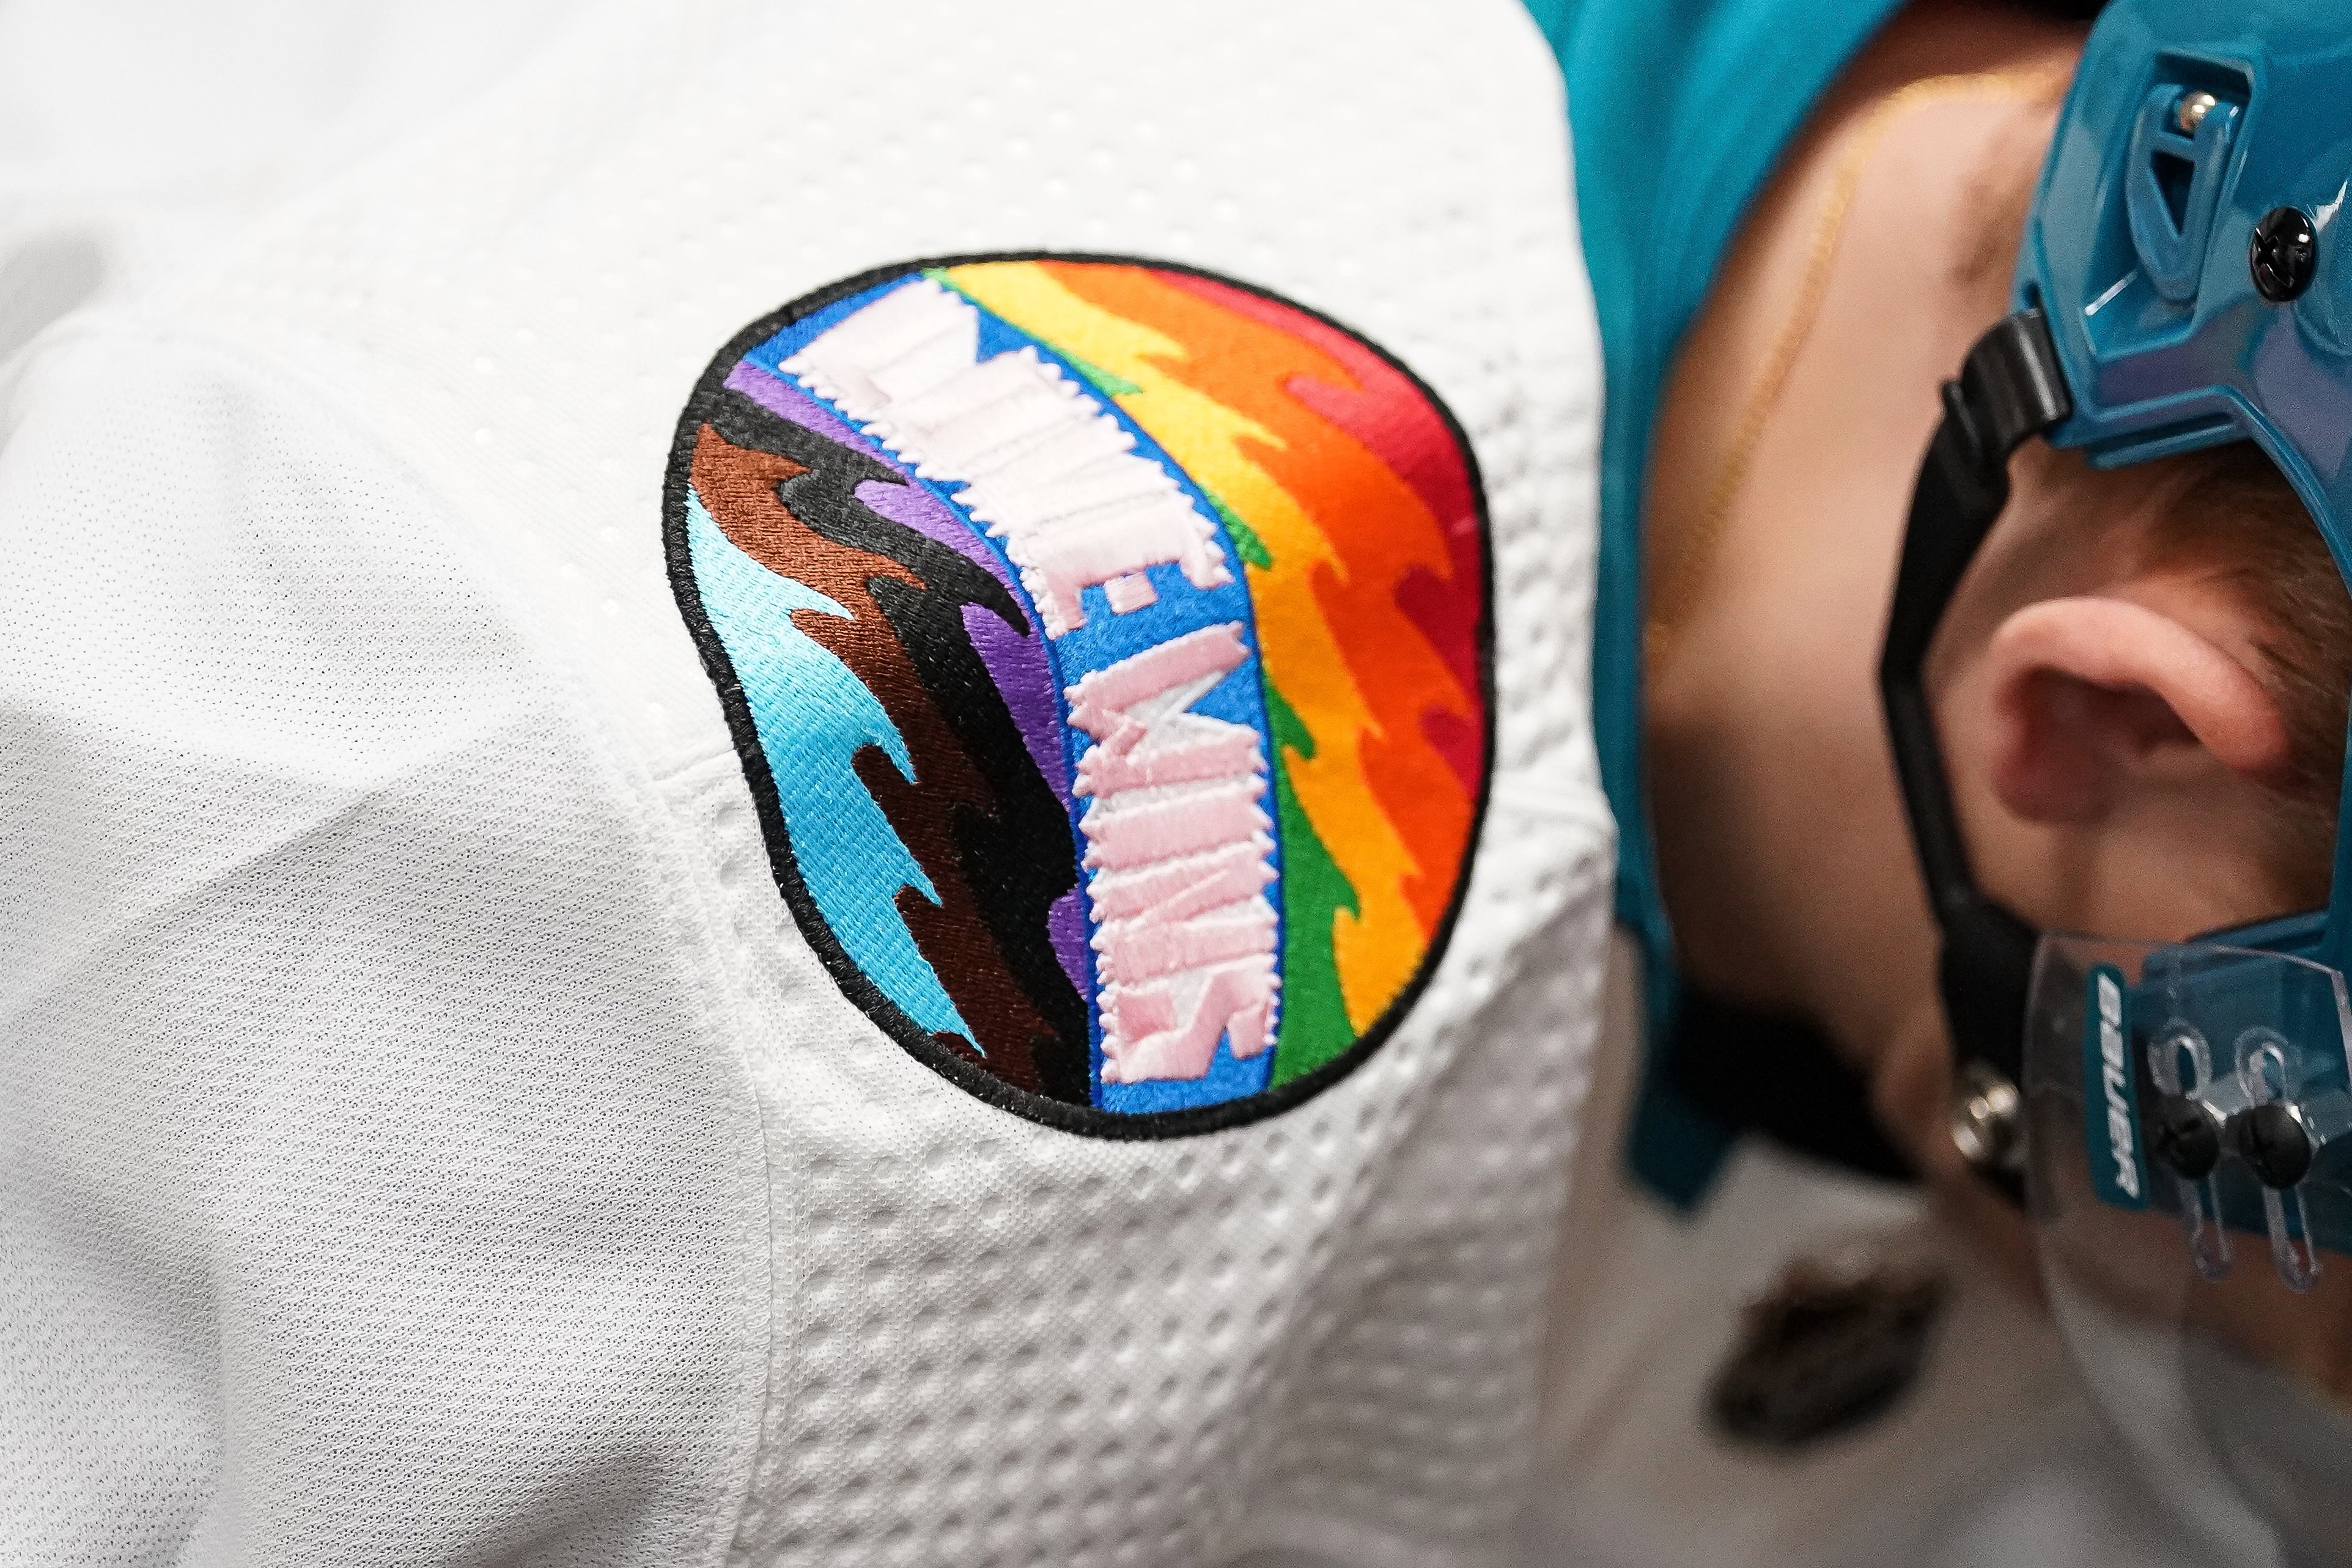 Sharks will give fans Warriors-themed jerseys as a promotional giveaway  this season - Article - Bardown